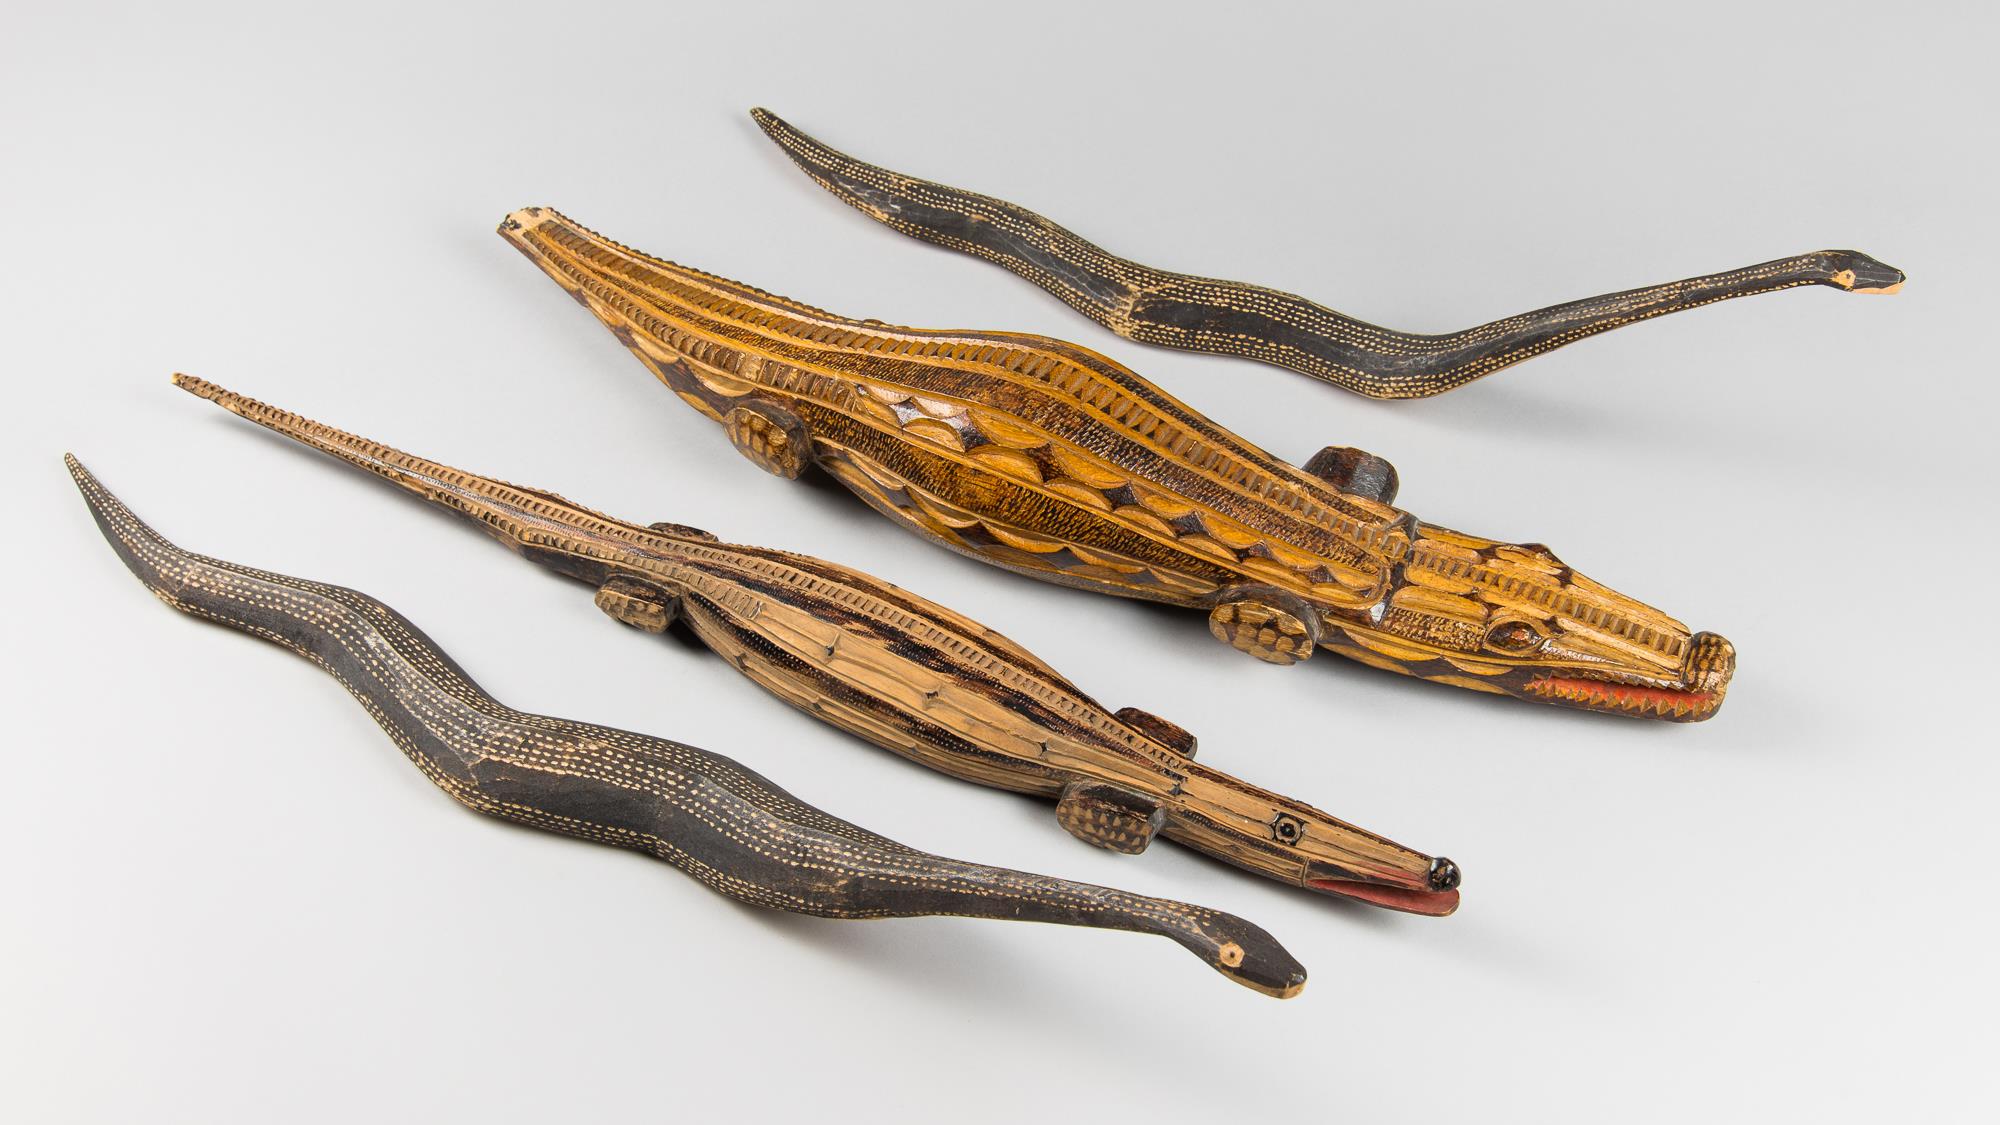 FOUR MID 20TH CENTURY AFRICAN TRIBAL ART CARVINGS OF TWO CROCODILES AND TWO SNAKES. Both